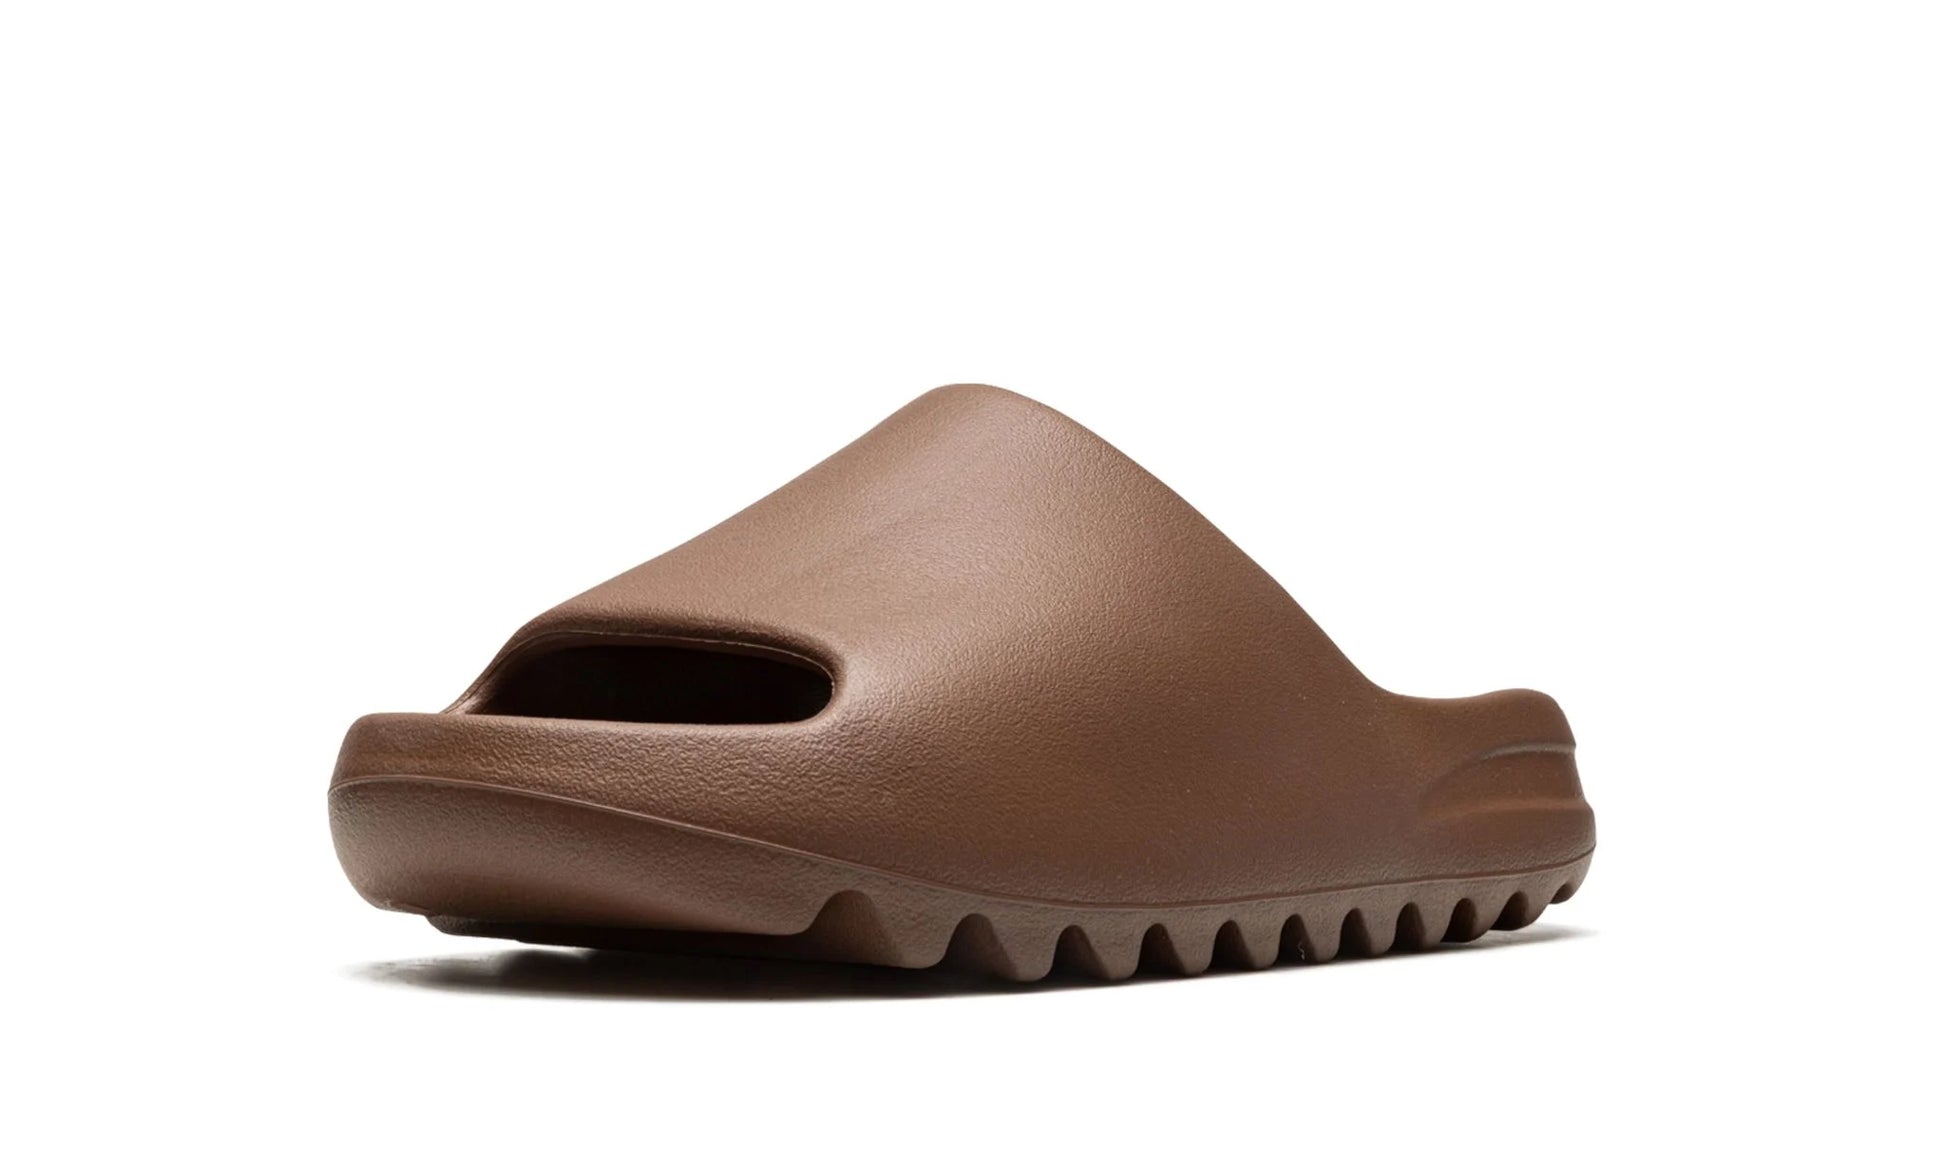 Adidas Yeezy Slide Flax Single Front View